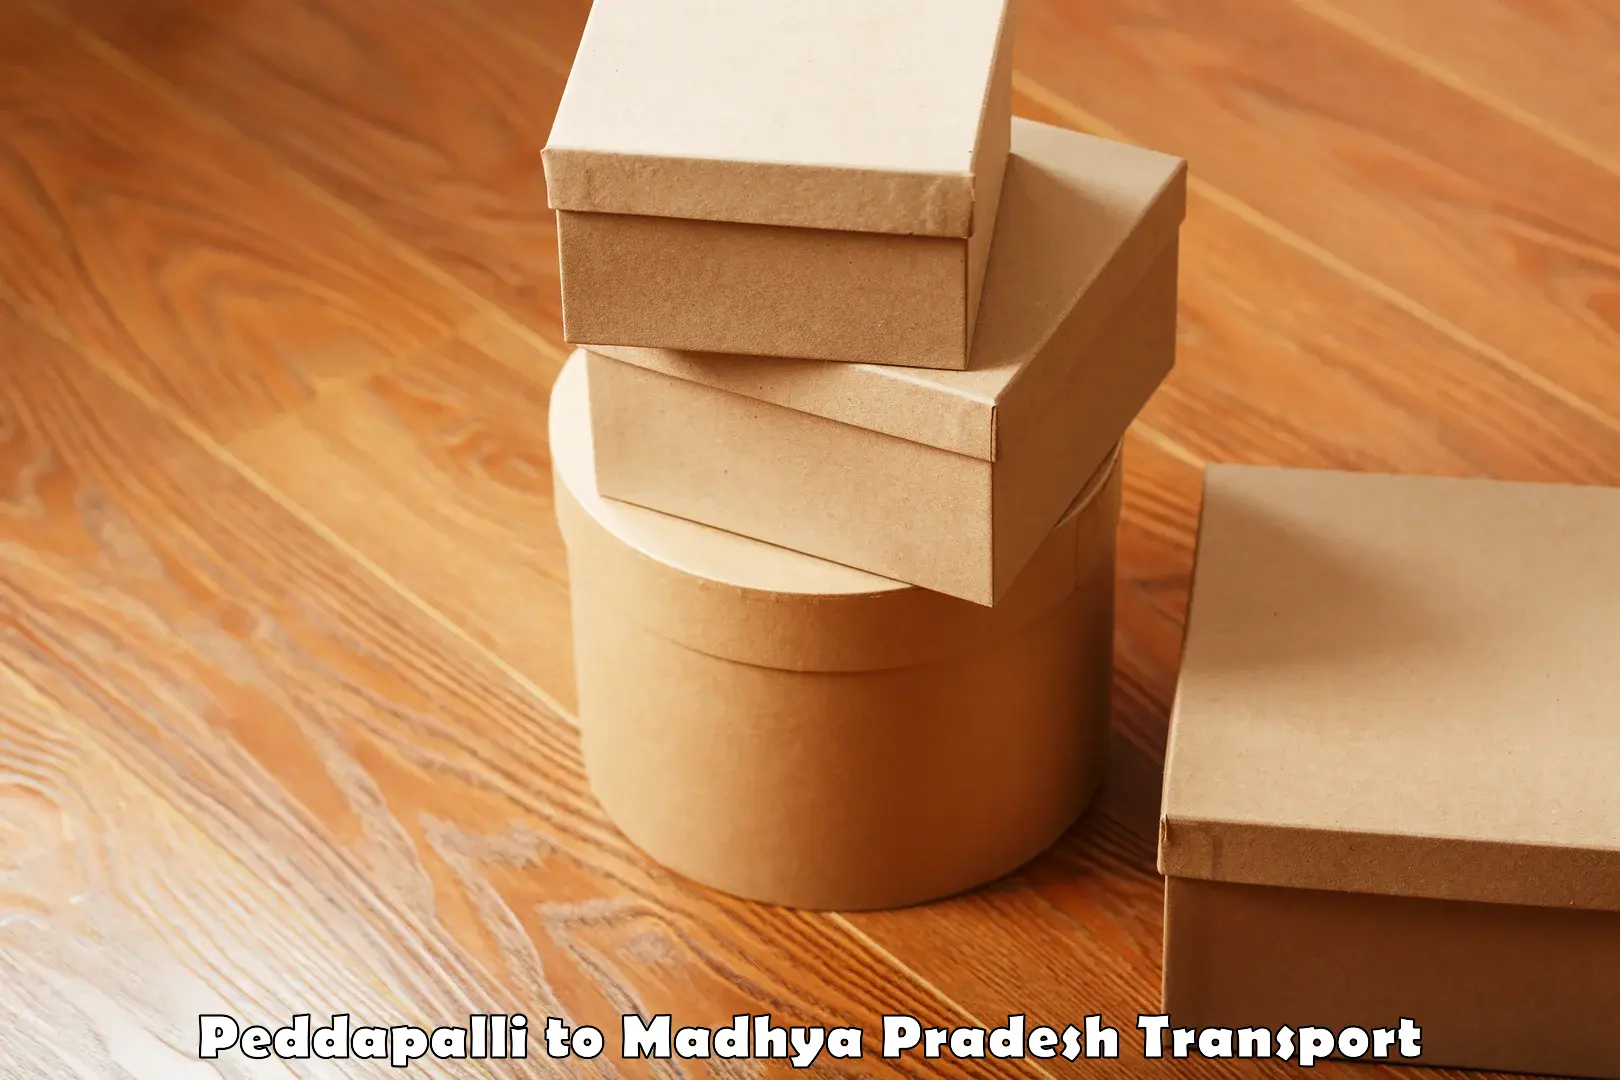 Container transport service Peddapalli to BHEL Bhopal